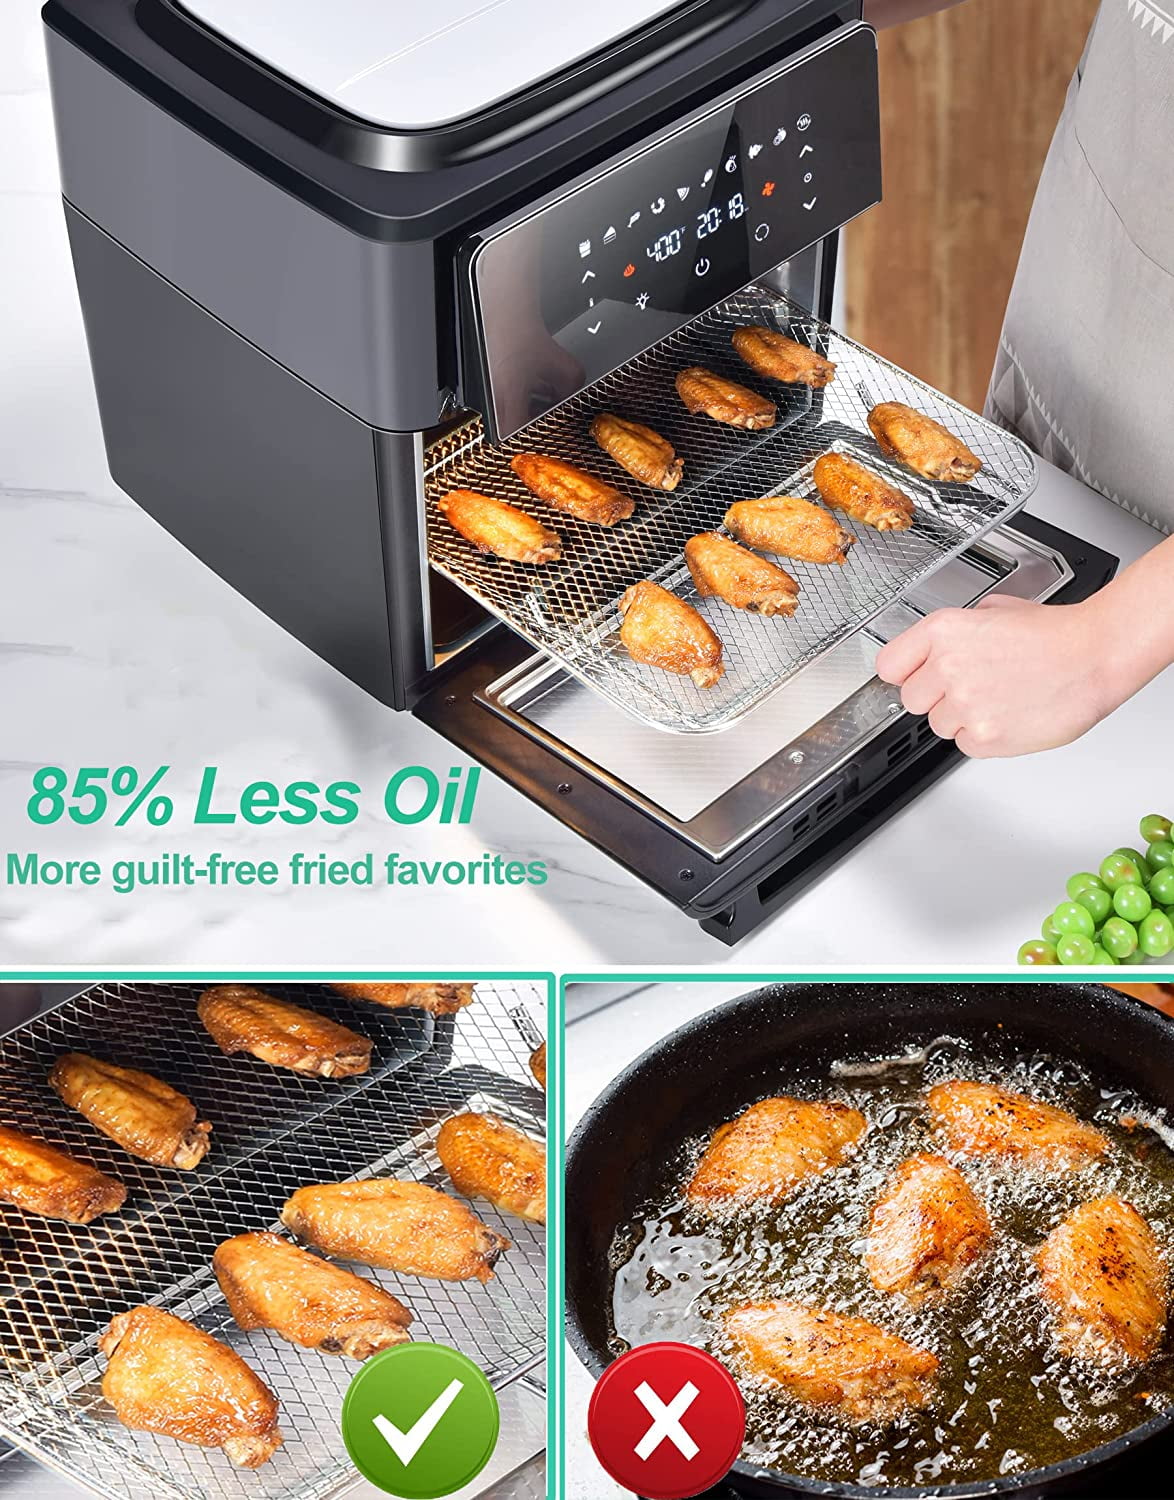 Air Fryer 6.2 qt Oilless 1500W Large Capacity Oven Air Fryers Healthy Cooker with 10 Preset, Visual Cooking Window, Non-Stick Basket, Included Recipe